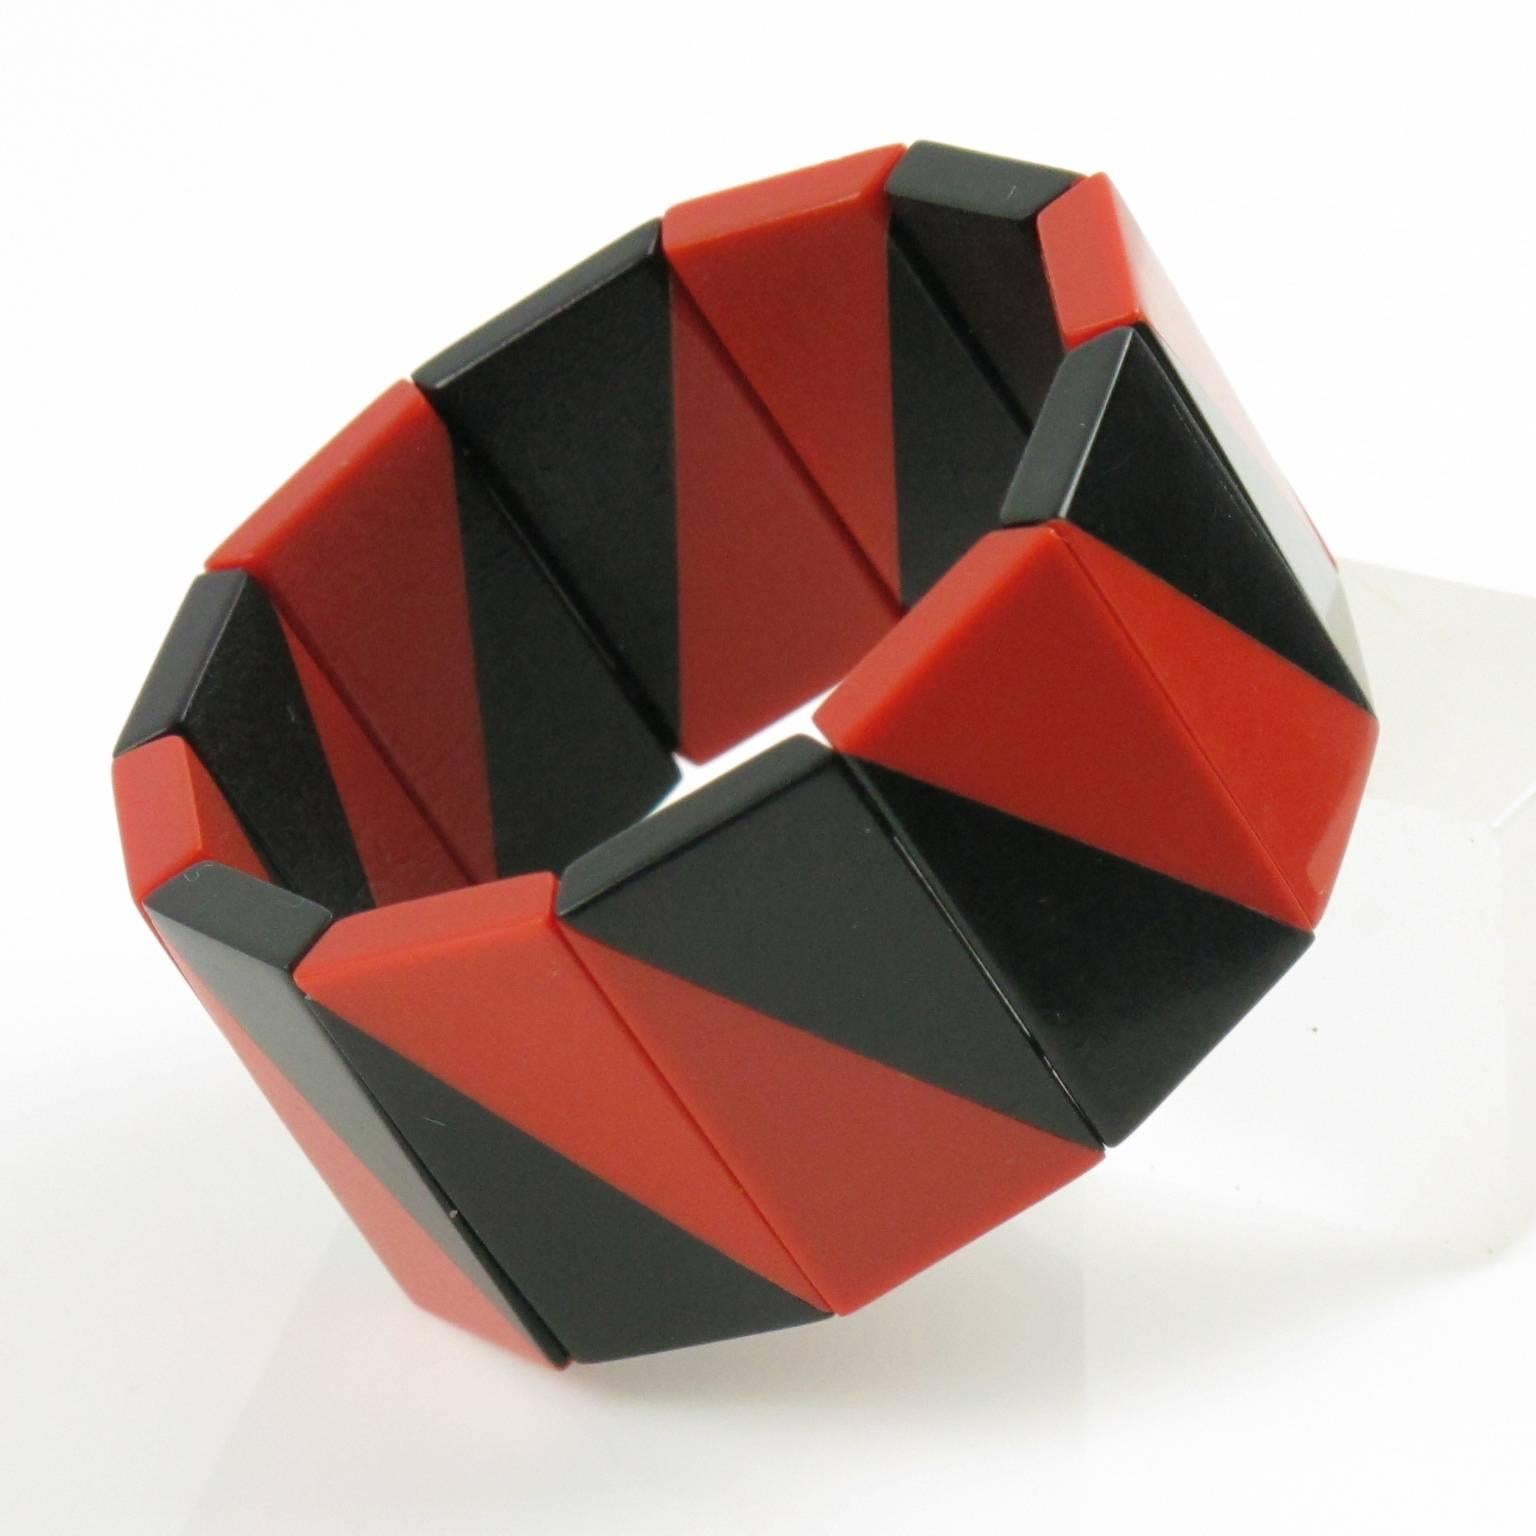 Rare Art Deco Auguste Bonaz France Galalith* stretch bracelet bangle. Superb geometric shape with black and red colors. No visible marking but the design and quality are unmistakable Bonaz signature.
Measurements: Inside across : 2.19 in. (5.5 cm) -